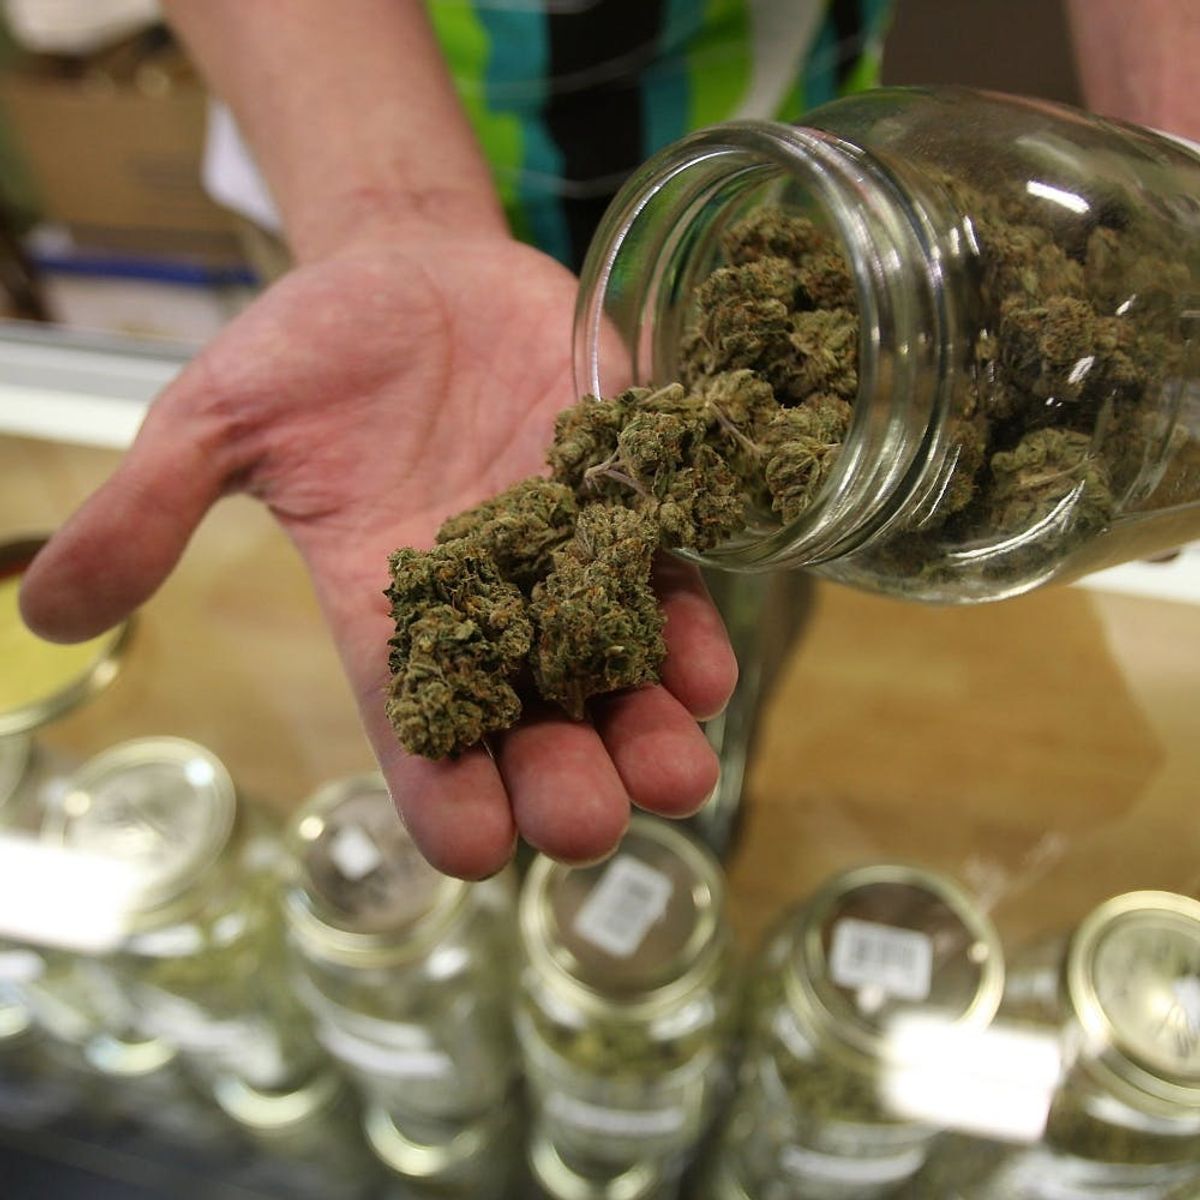 Marijuana Could Soon Be Legal in All 50 States